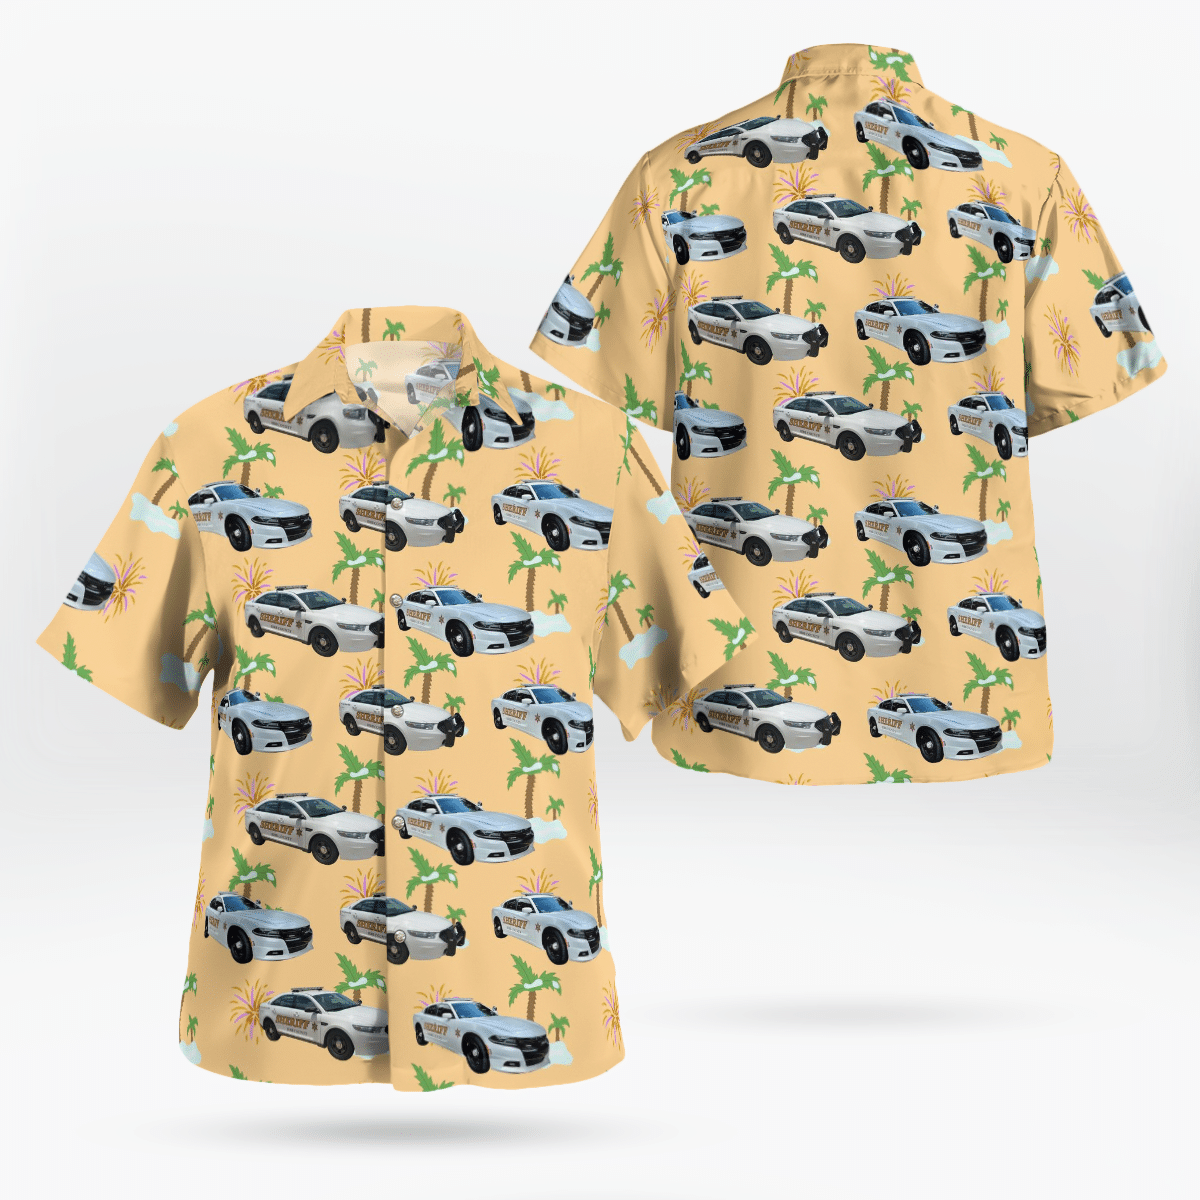 Consider getting these Hawaiian Shirt for your friends 7